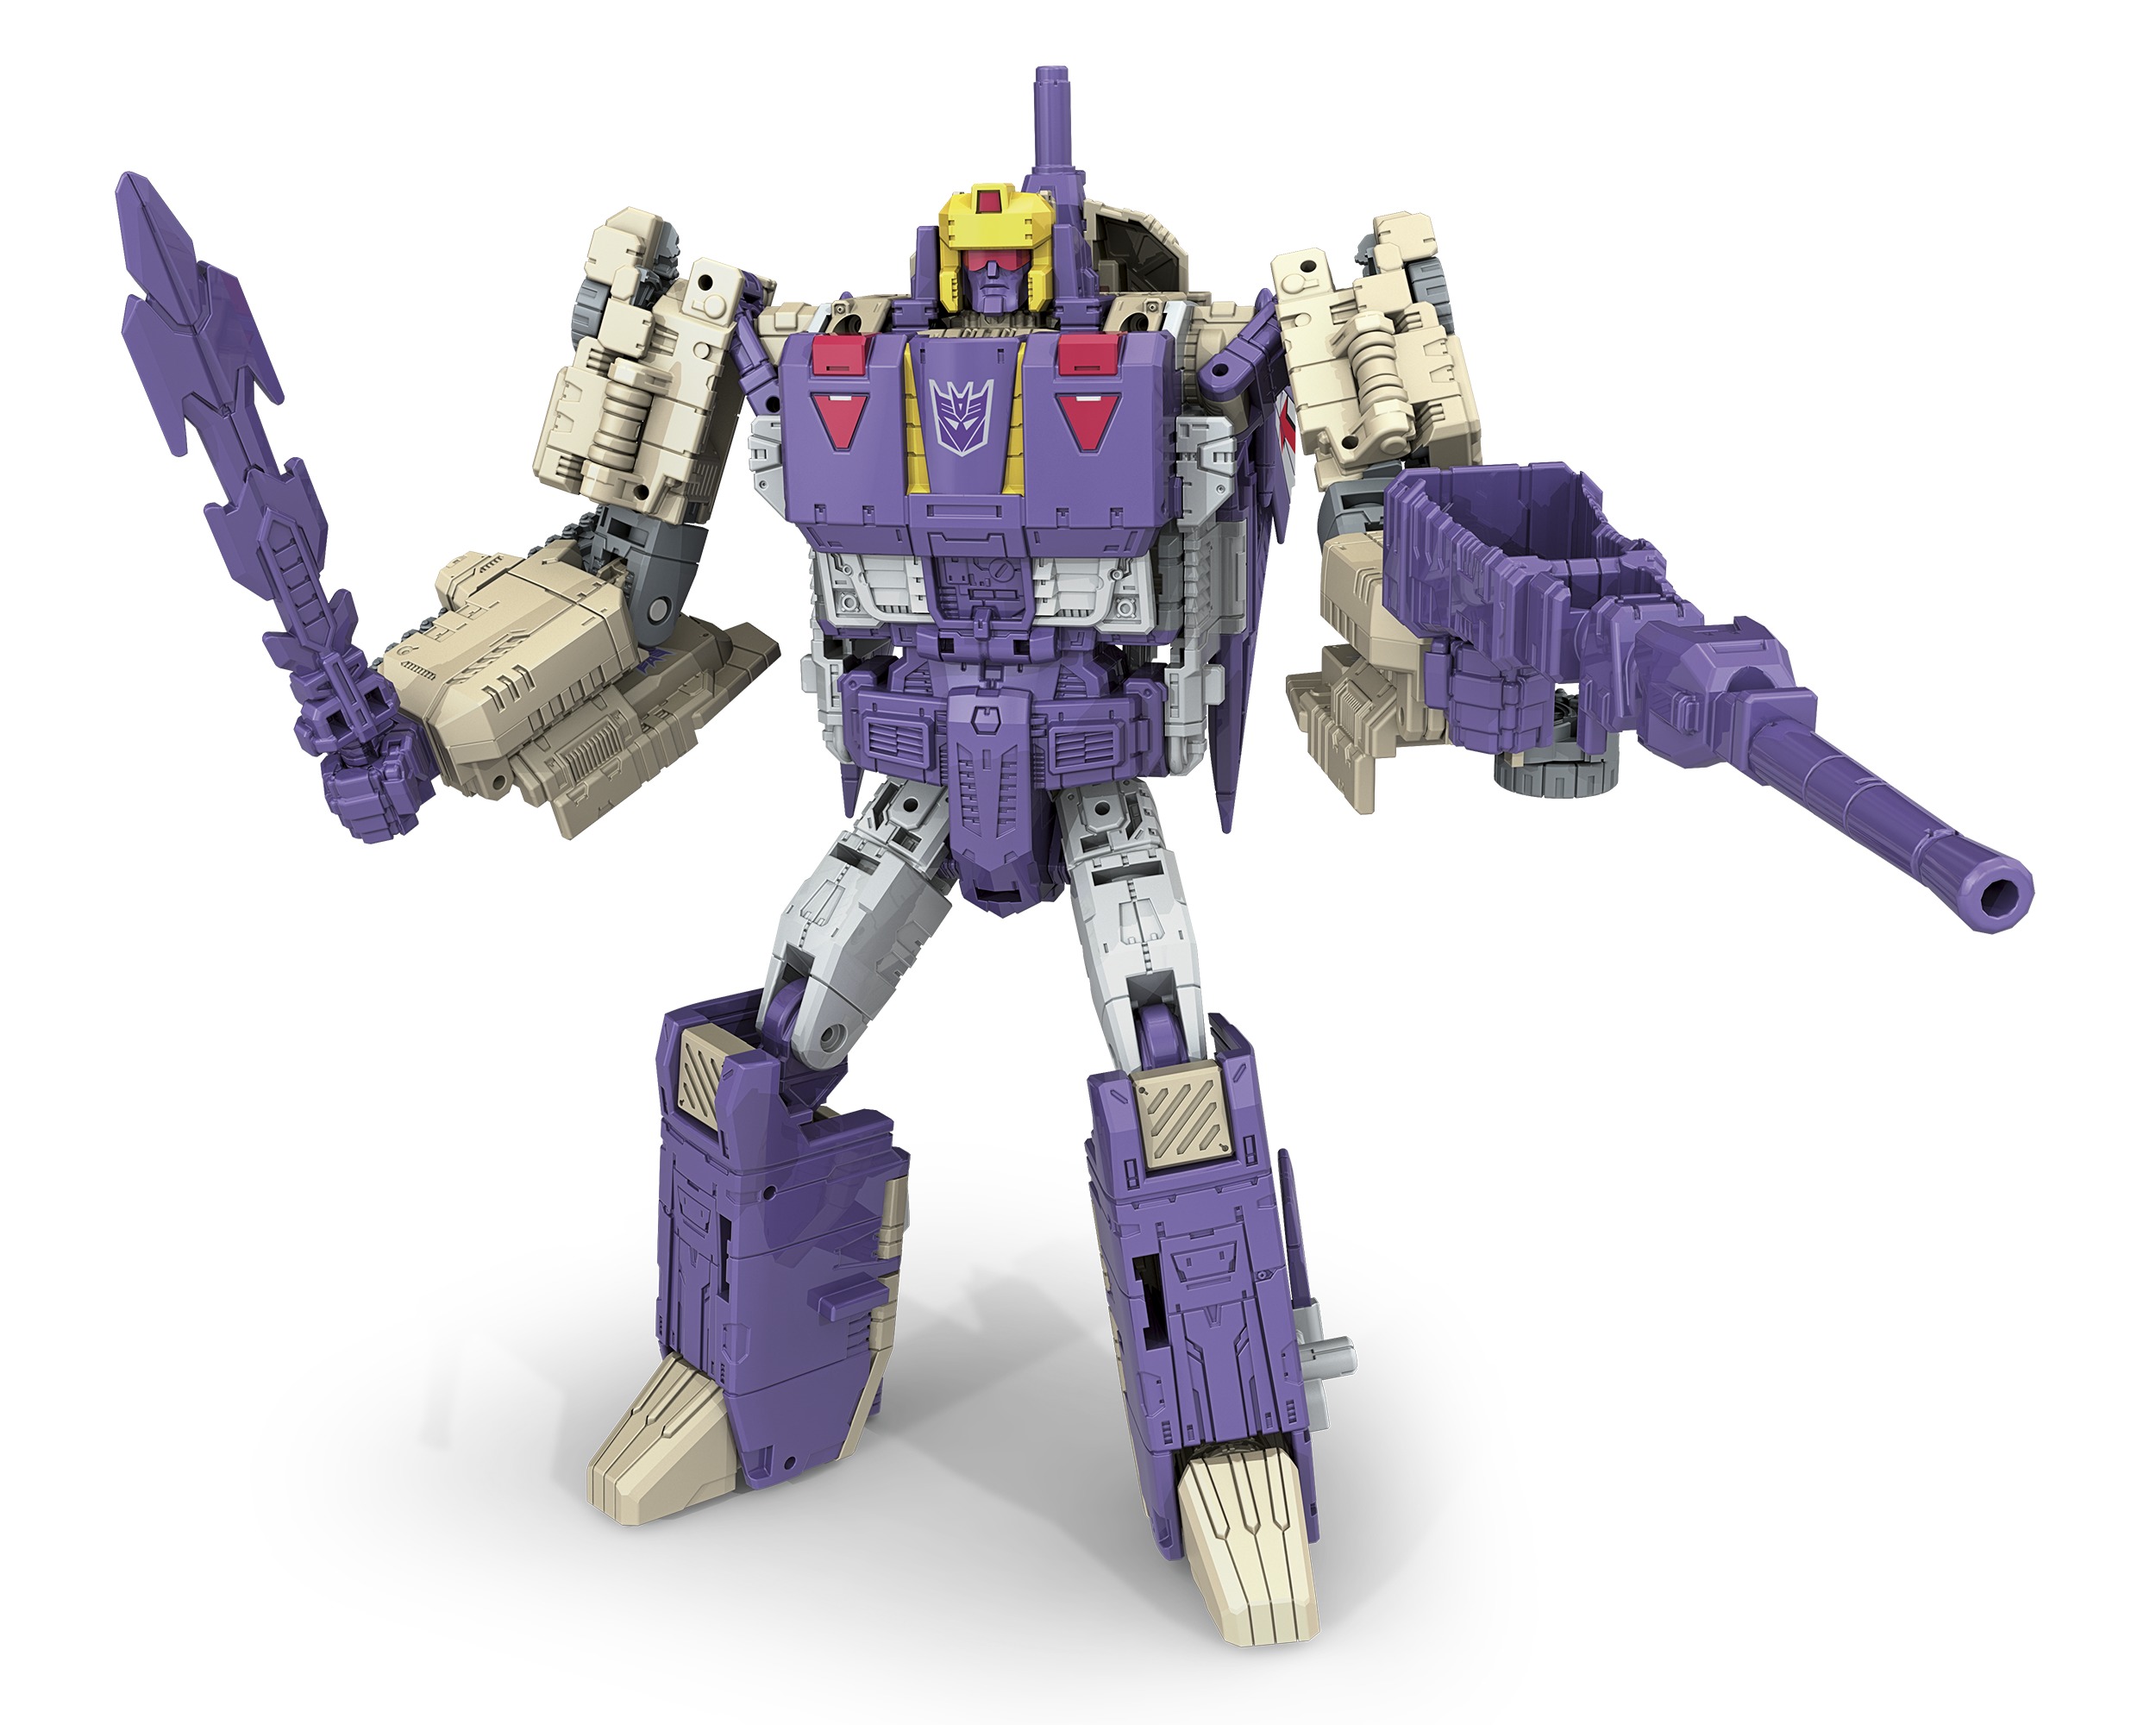 Transformers News: Transformers Titans Return Blitzwing and Cosmos now Available on Hasbro Toy Shop